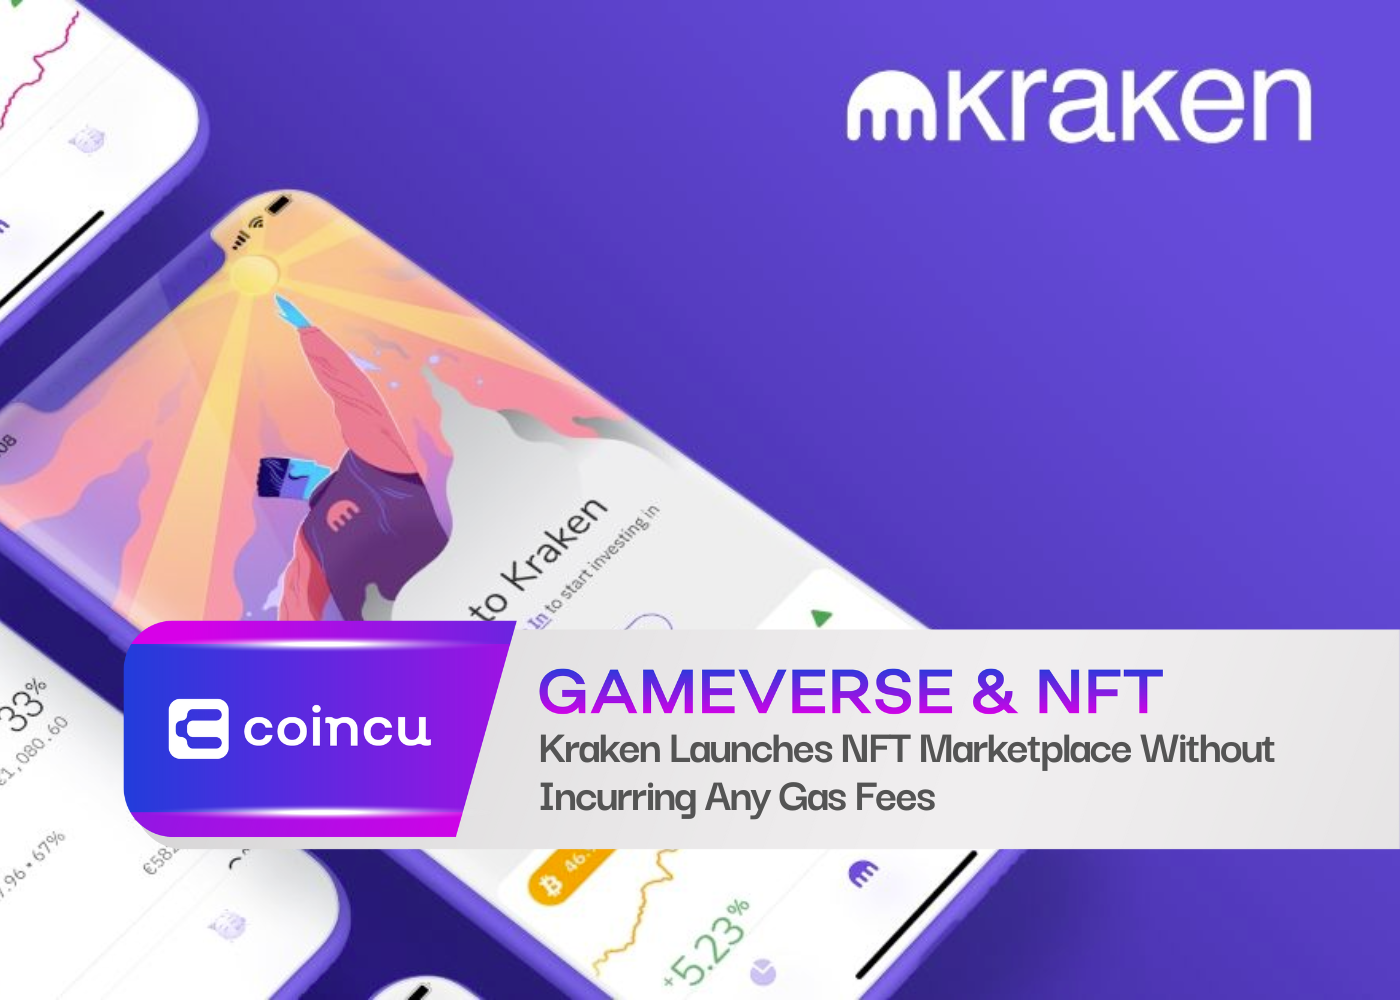 Kraken Launches NFT Marketplace Without Incurring Any Gas Fees